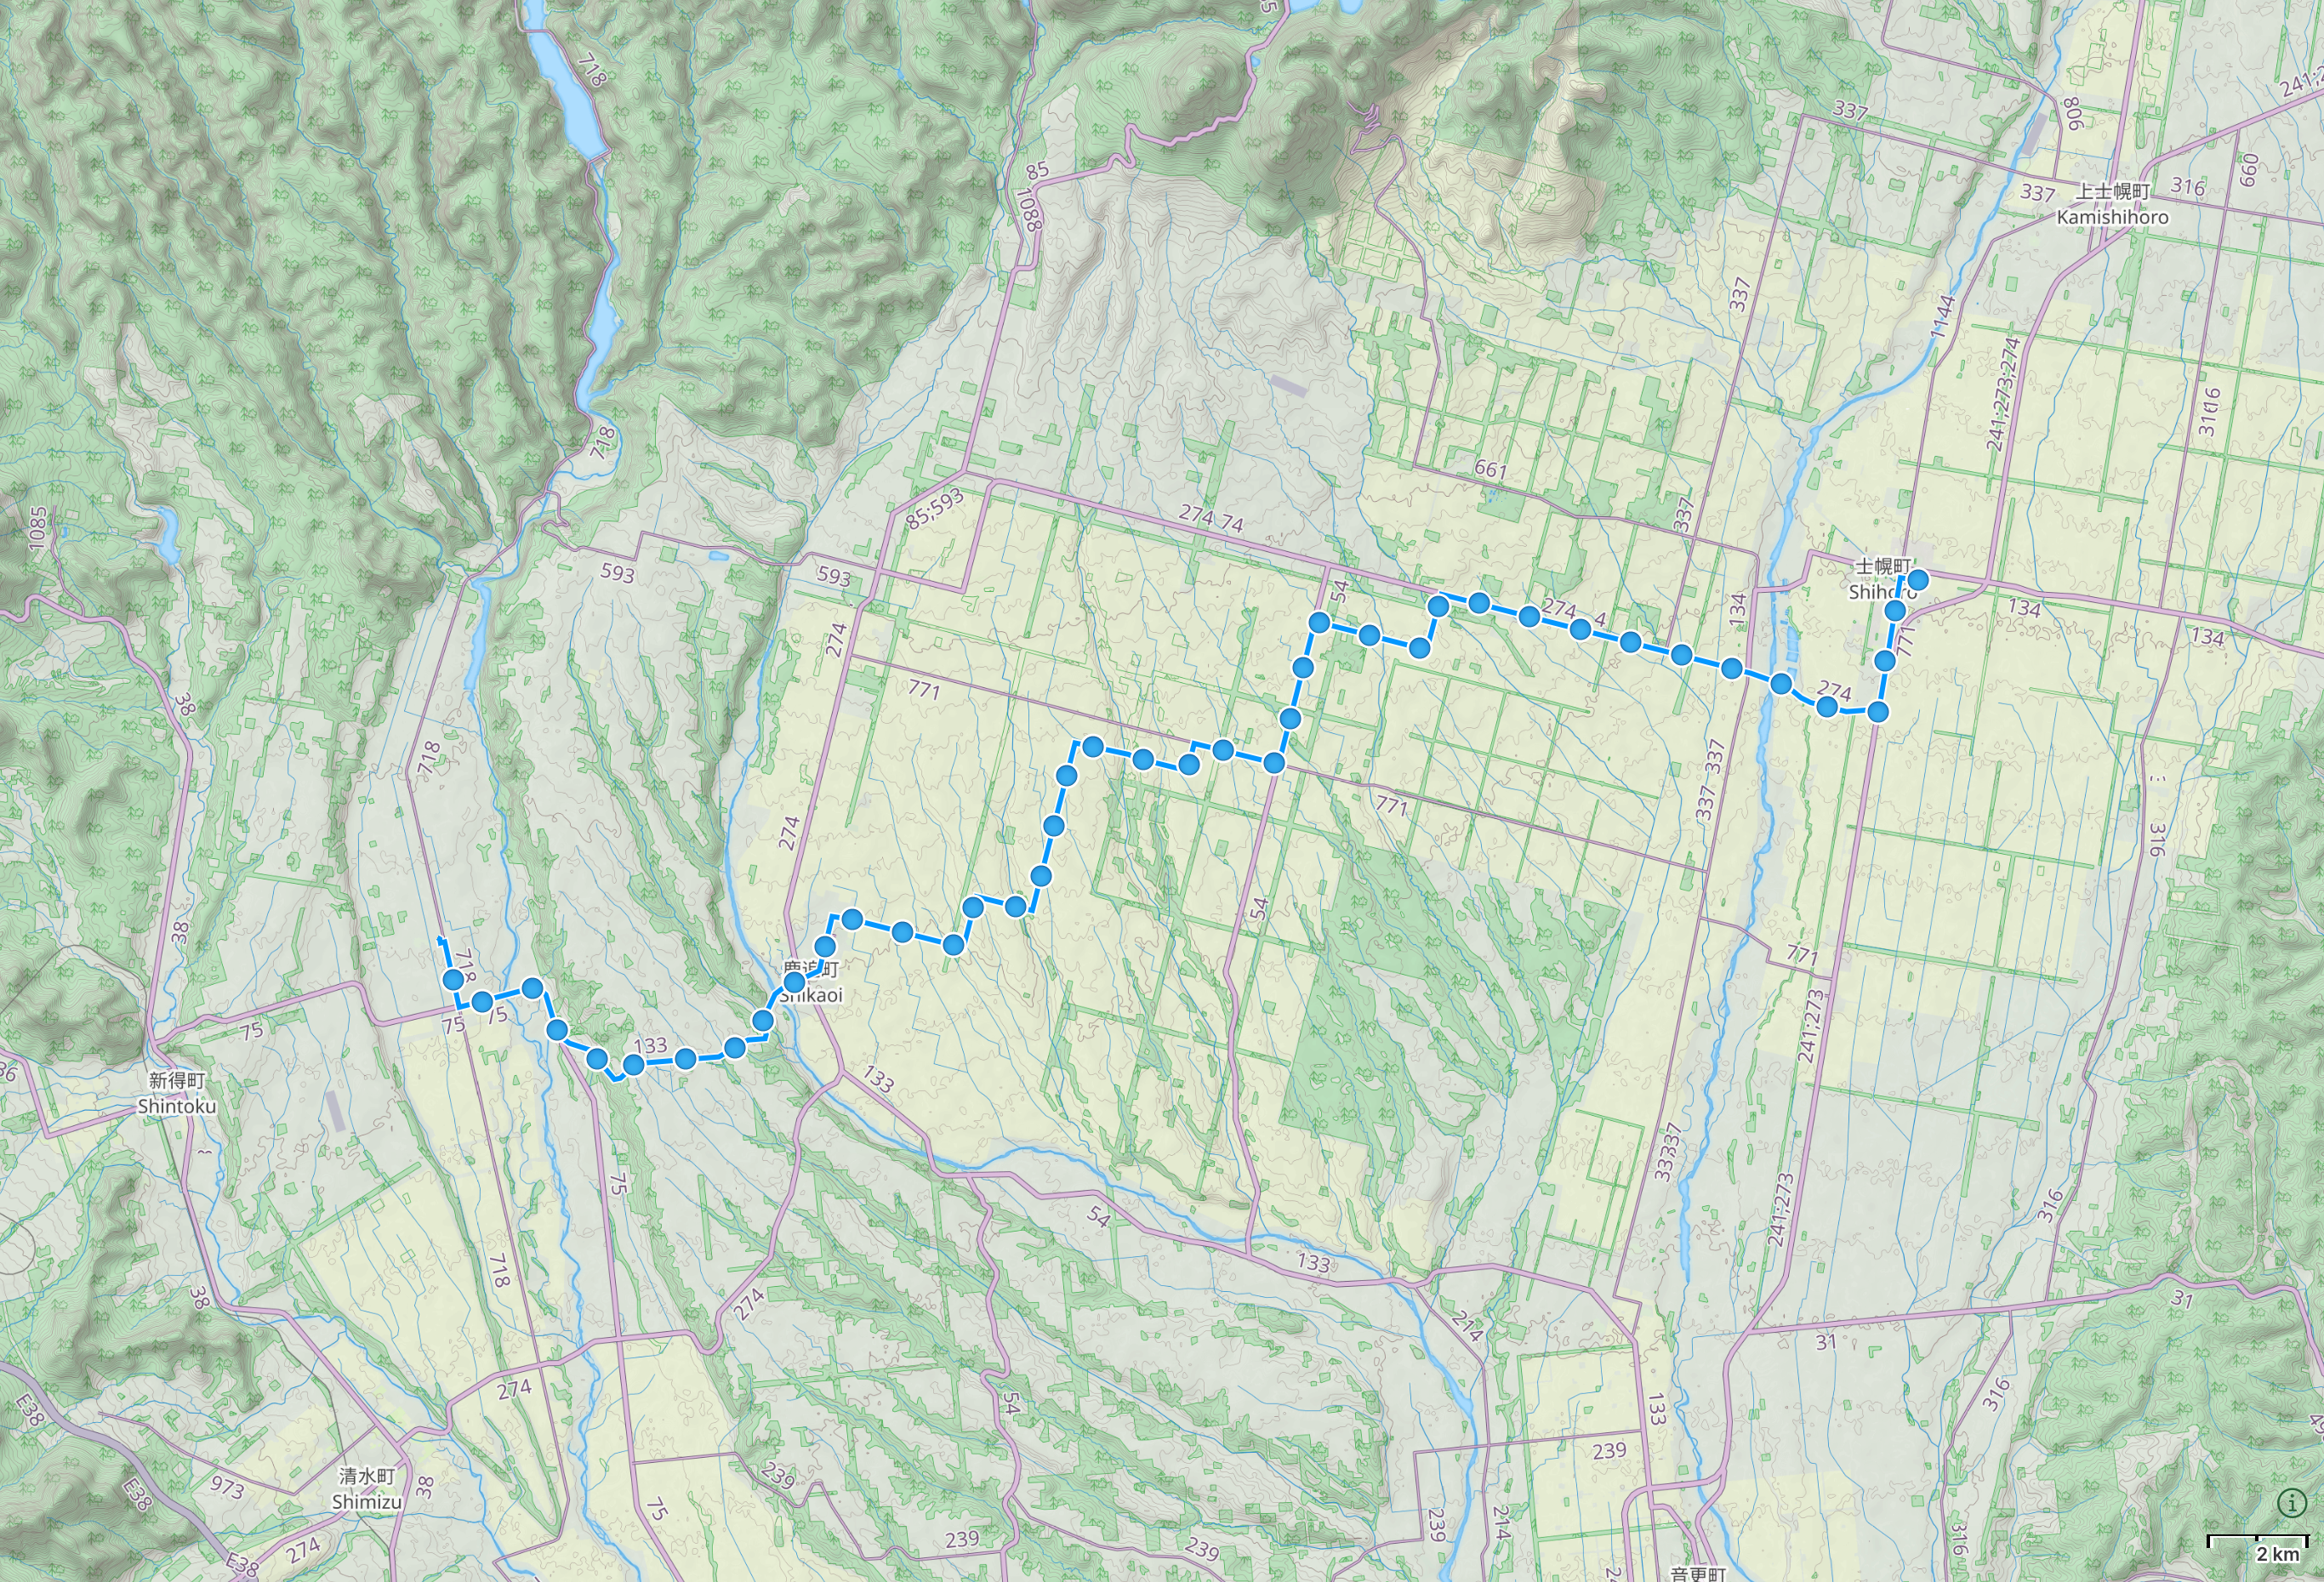 Map of Hokkaido with author’s route from Shintoku to Shihoro highlighted.